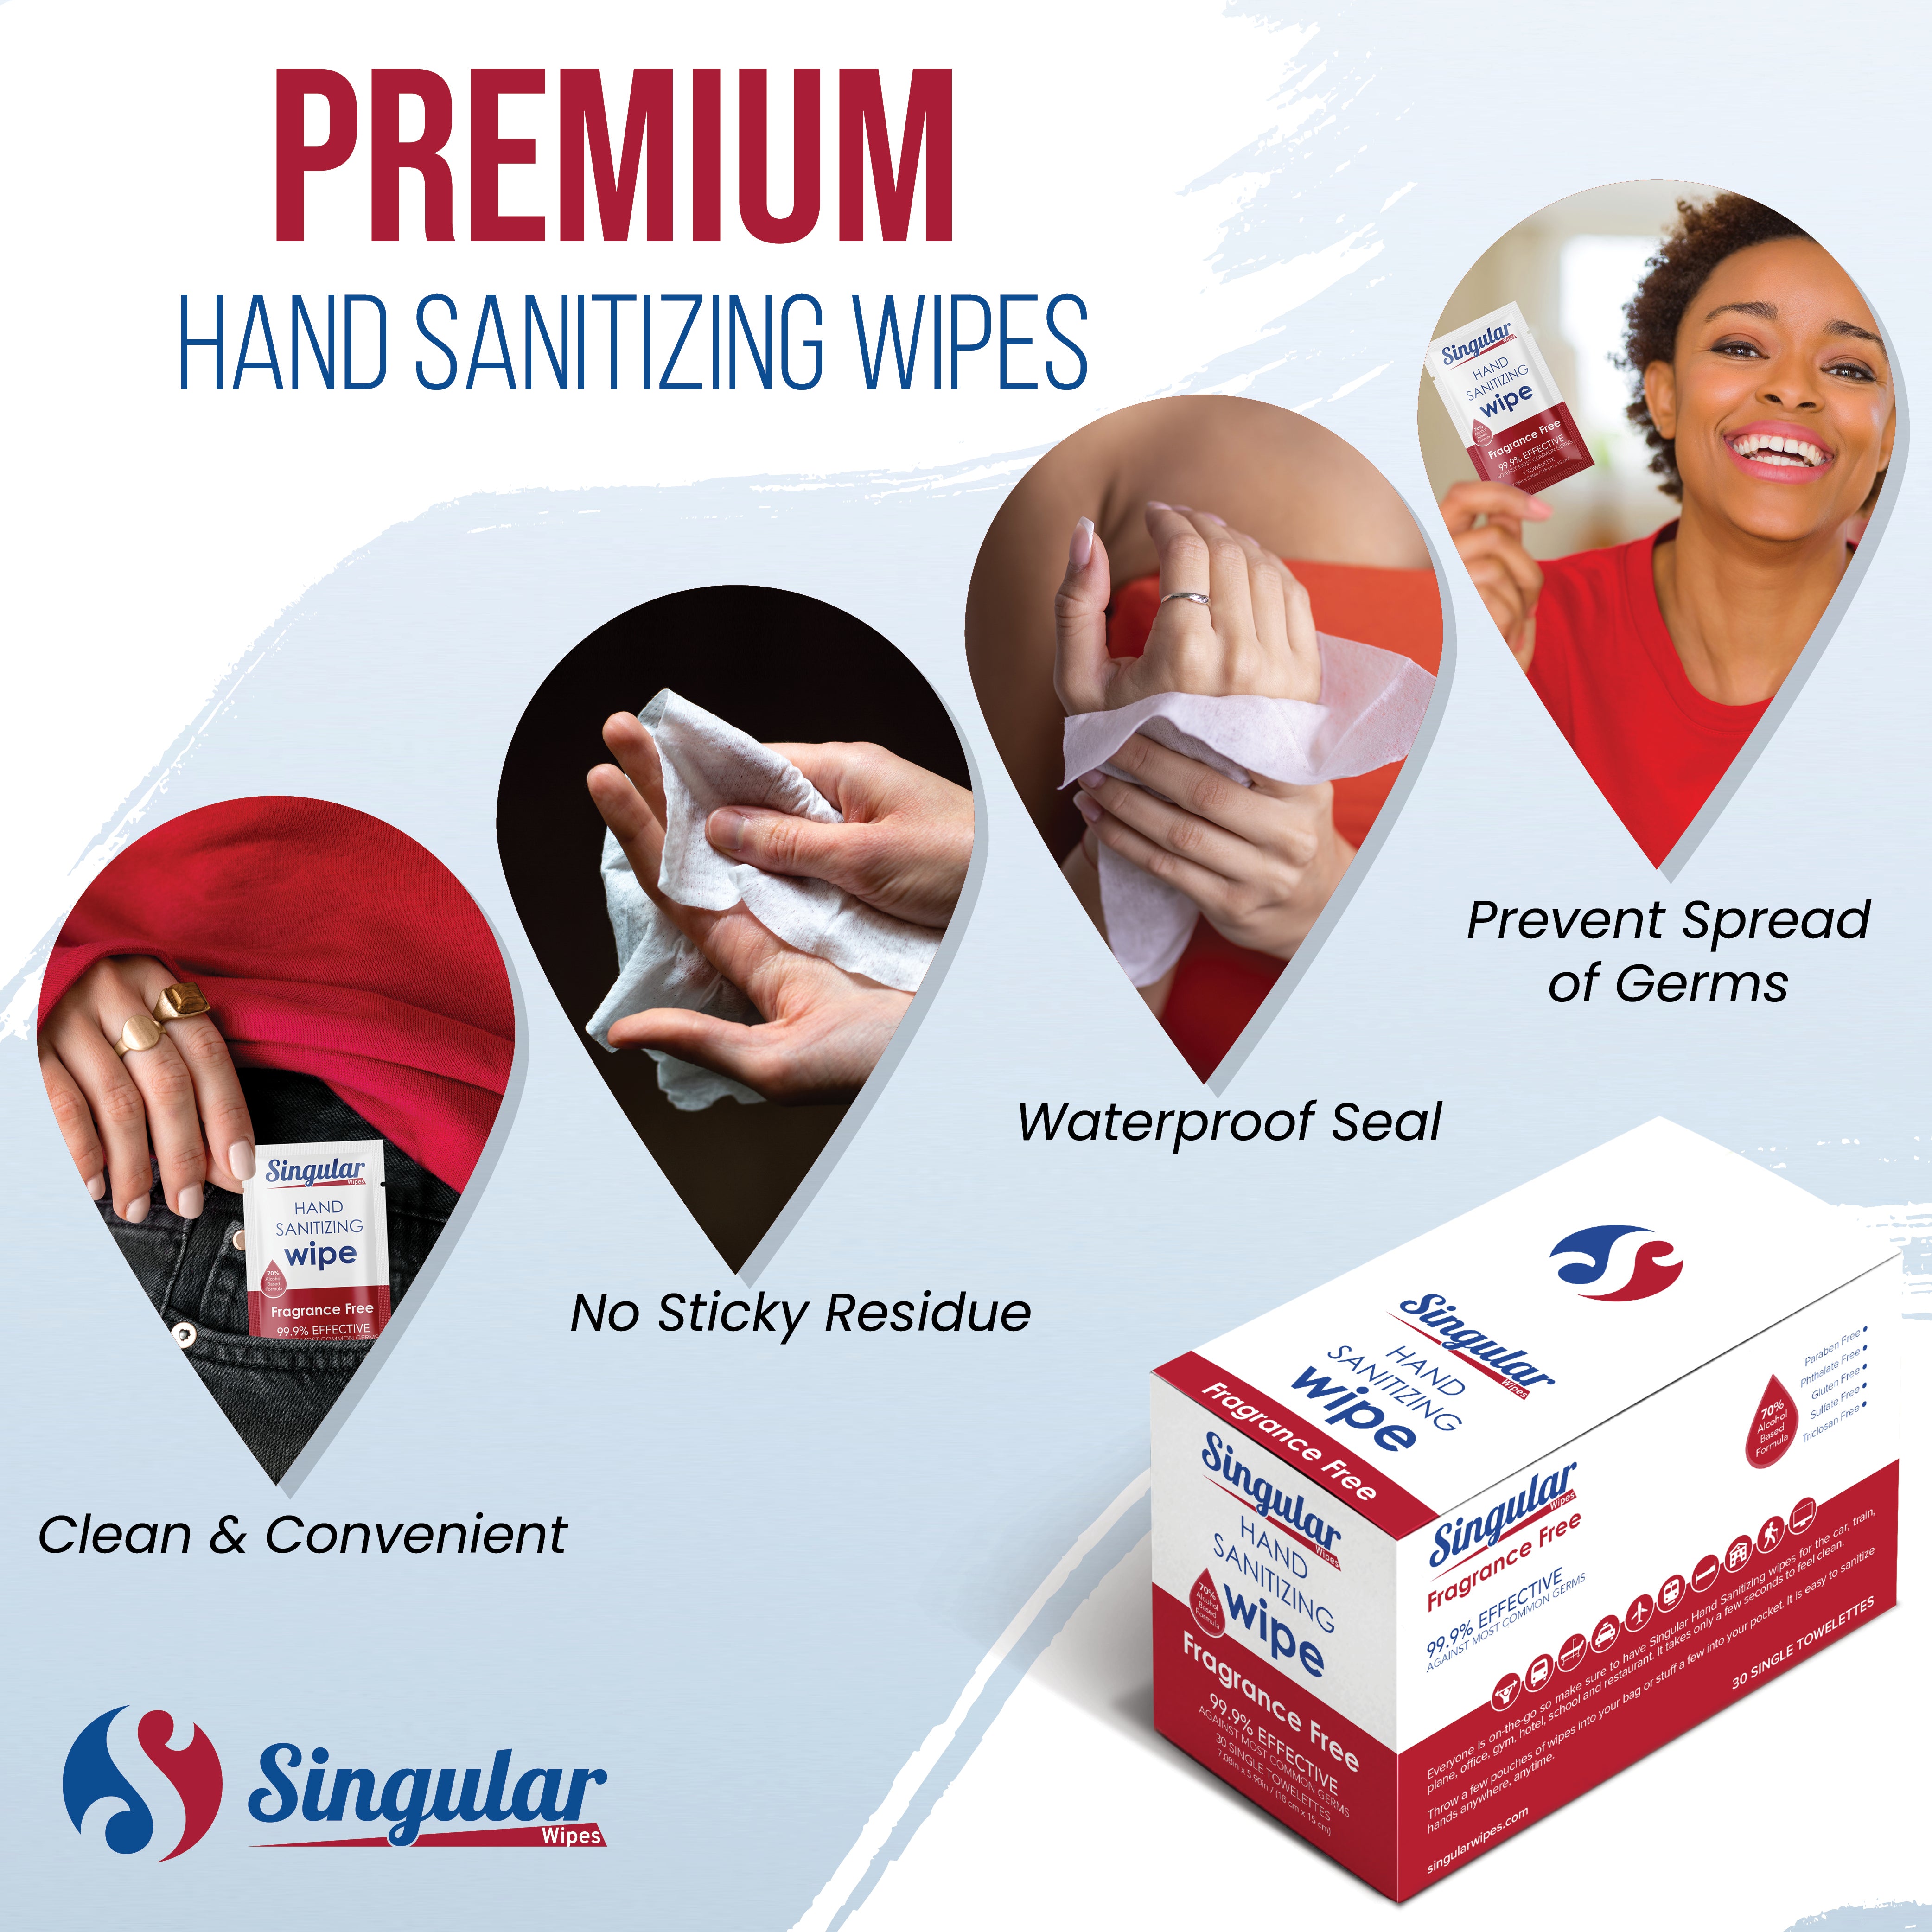 HAND SANITIZING WIPES - Individually Packed Premium Hand Sanitizing Wipes for Travel, Home, Office, School, etc. with Moisturizer - Made in USA (Fragrance Free 30ct Box)